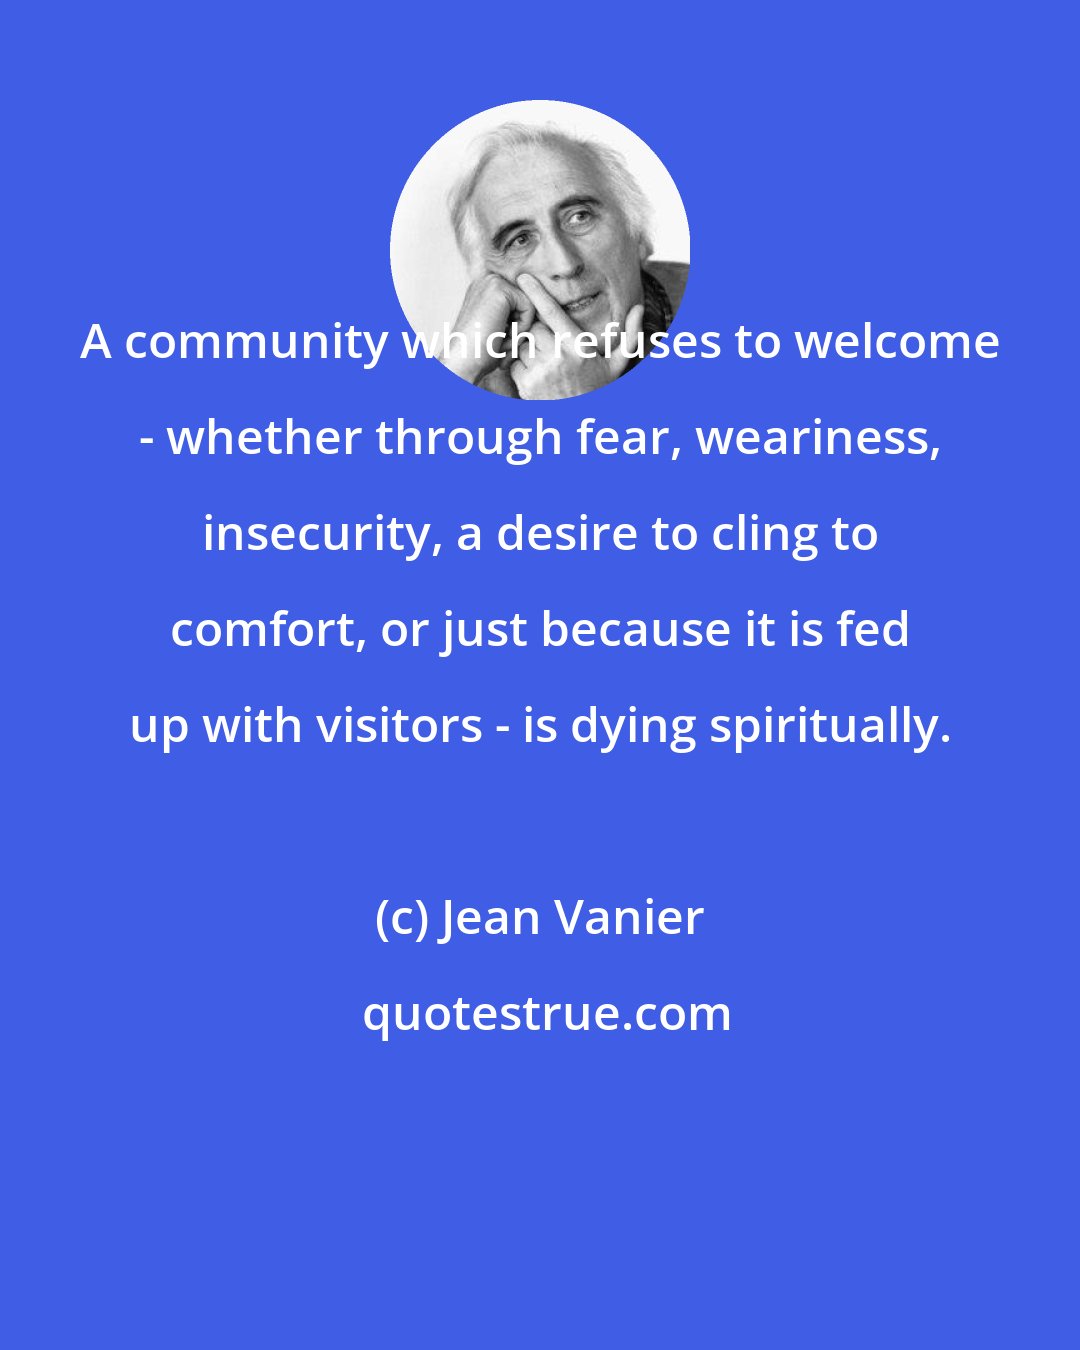 Jean Vanier: A community which refuses to welcome - whether through fear, weariness, insecurity, a desire to cling to comfort, or just because it is fed up with visitors - is dying spiritually.